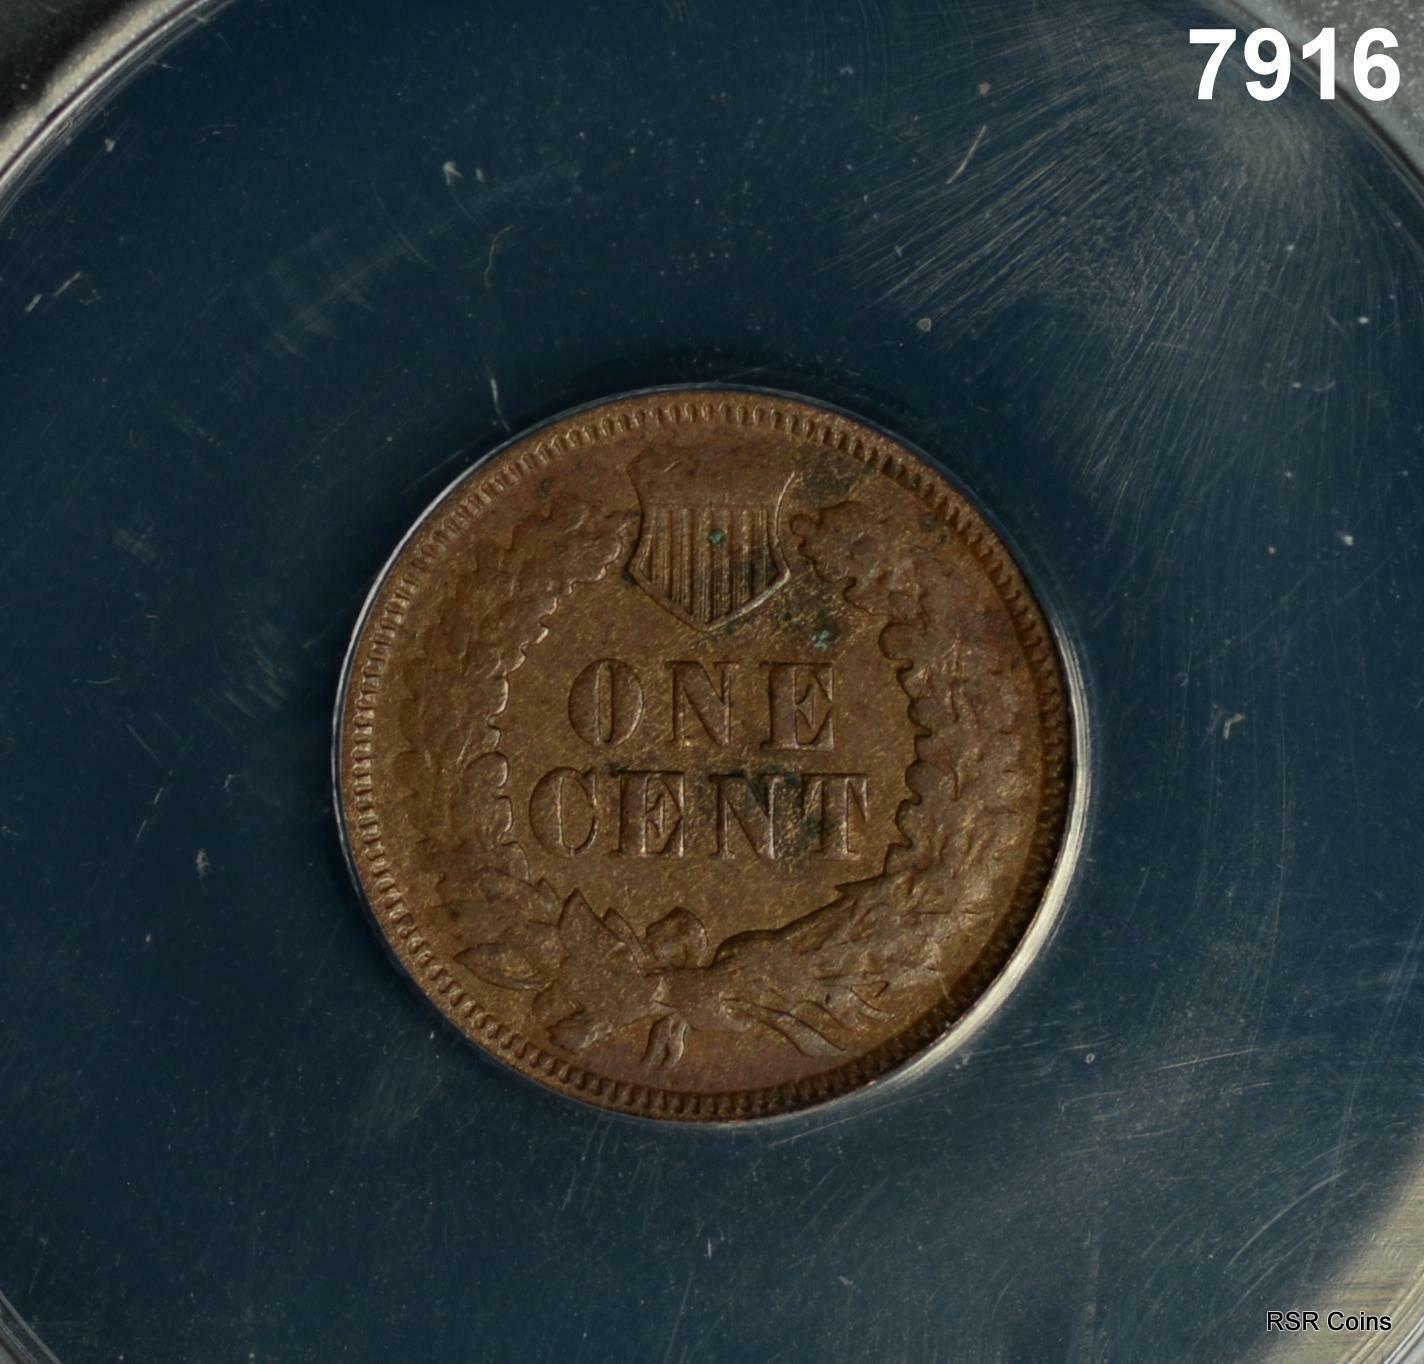 1872 INDIAN HEAD CENT ANACS CERTIFIED VF30 BOLD N CORRODED #7916